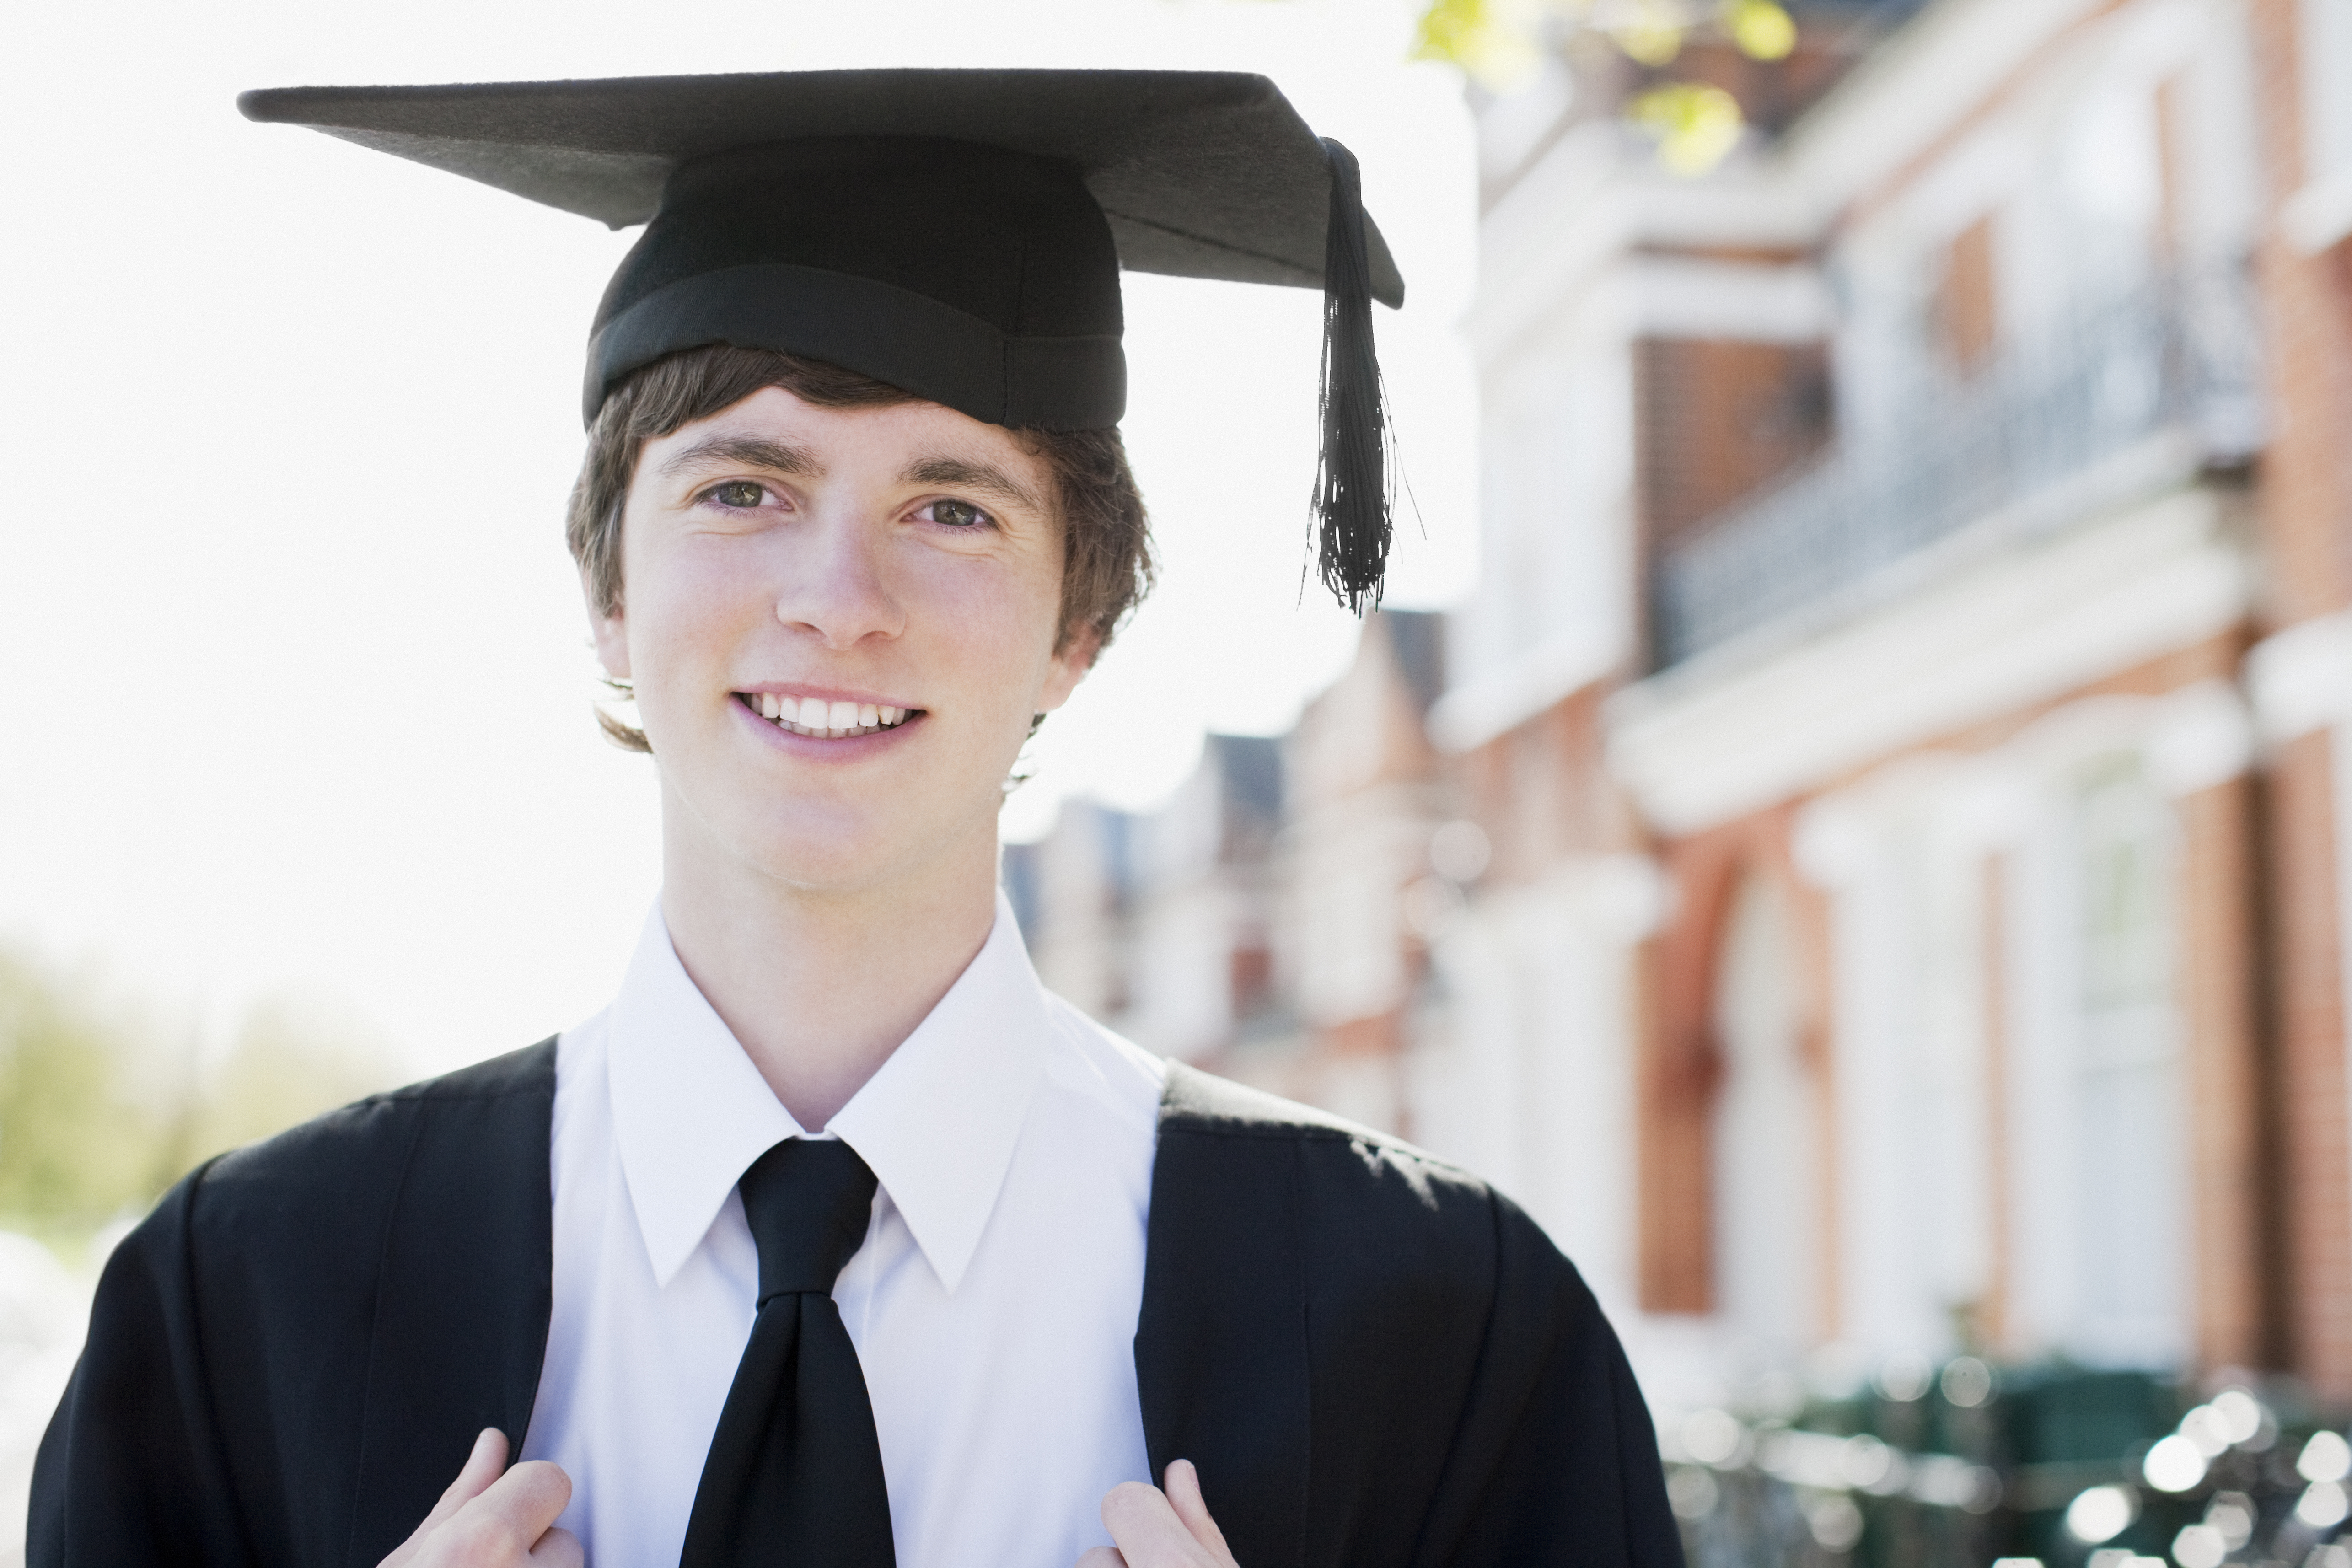 A young man wearing a graduation cap and gown | Source: Getty Images